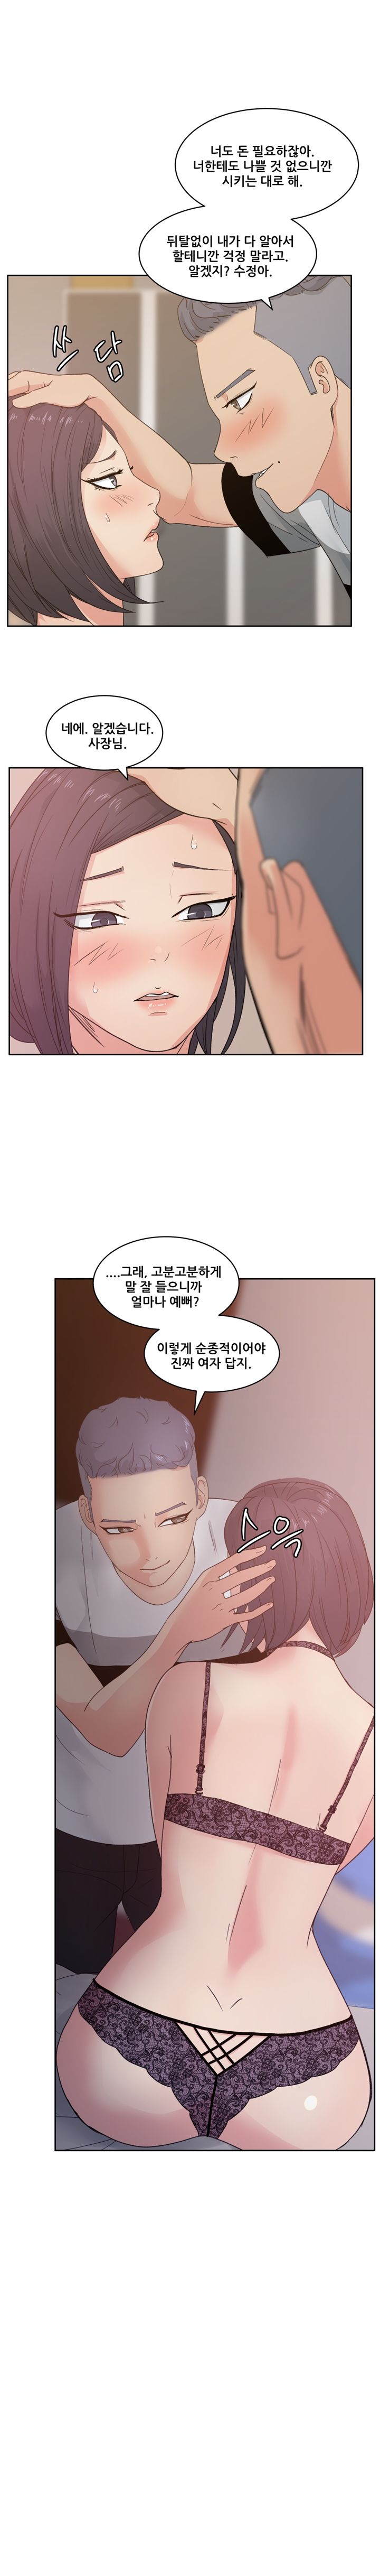 Sooyung Comic Shop Raw - Chapter 11 Page 9